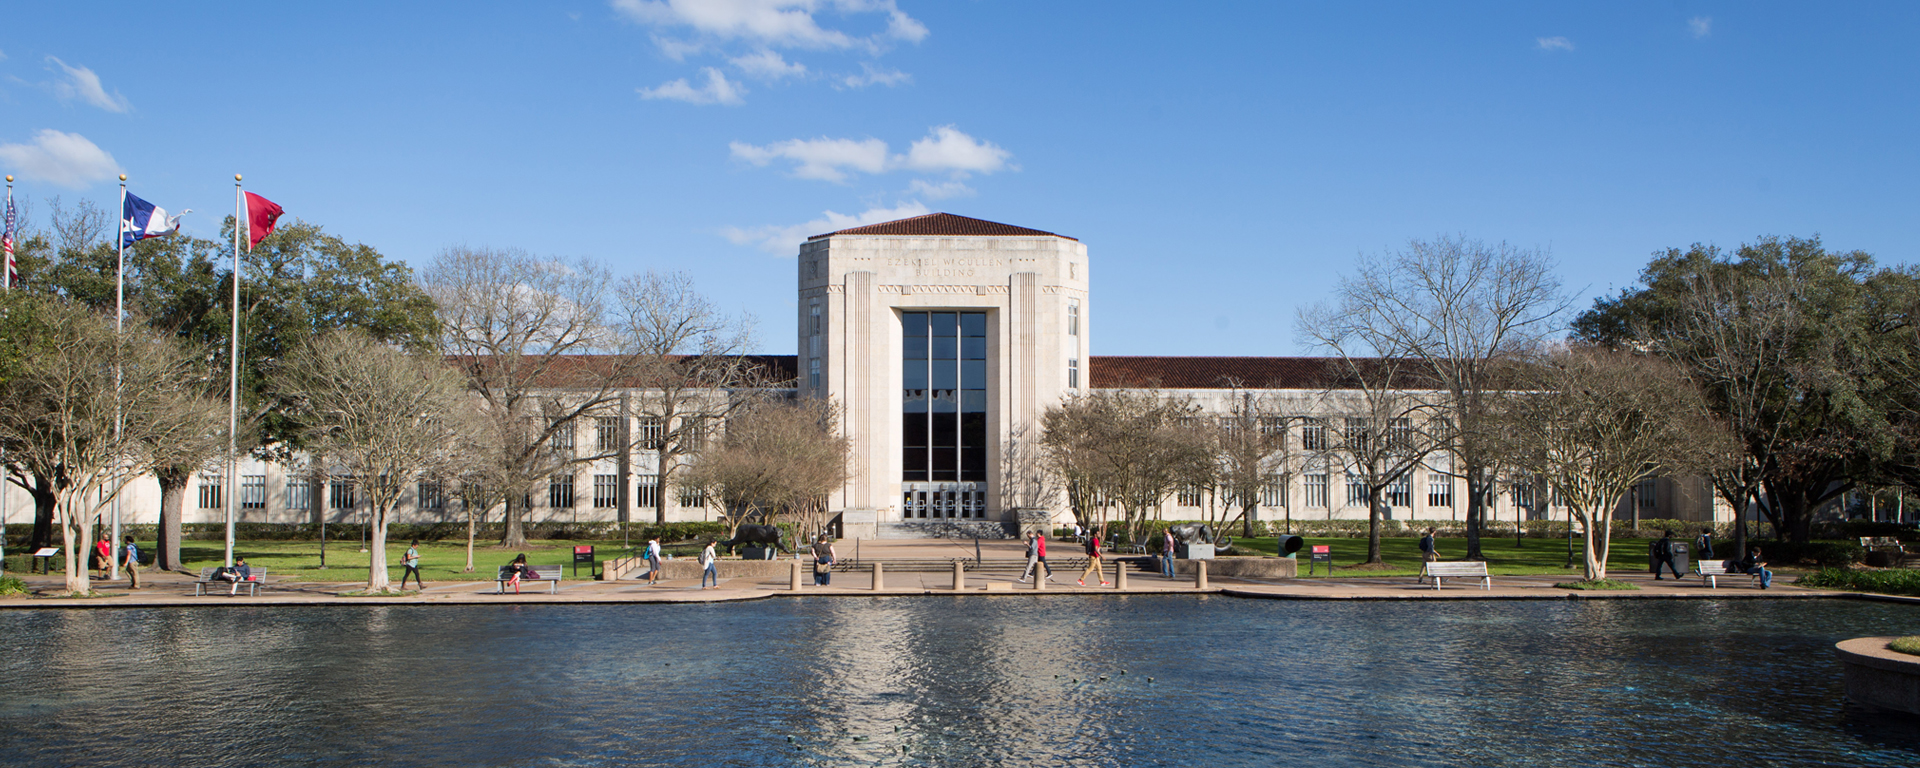 Image of E. Cullen Building and Fountain